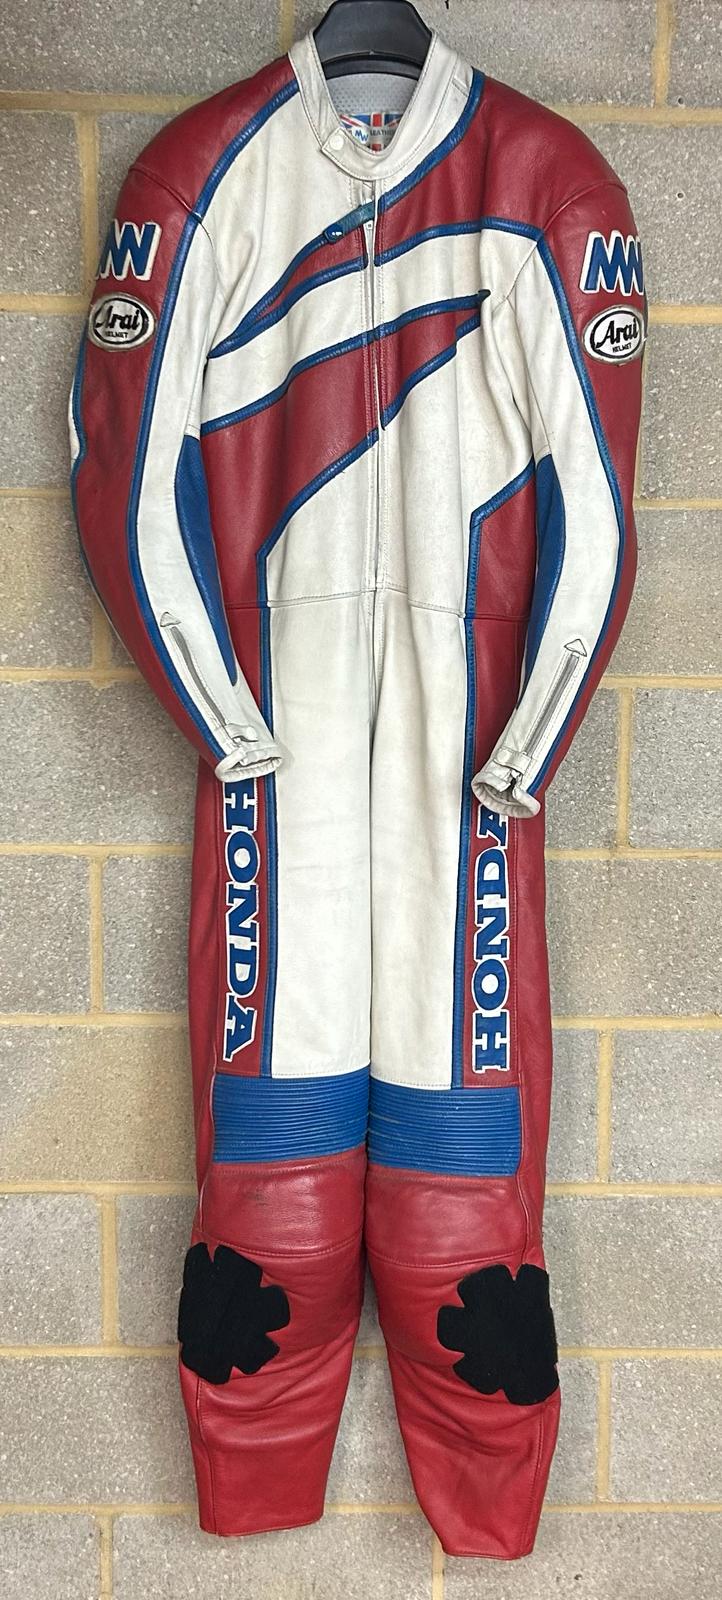 VINTAGE MIKE WILLIS MW LEATHERS. MOTORCYCLE RACING ONE PIECE SUIT WITH HONDA AND ARAI LOGOS . BLUE